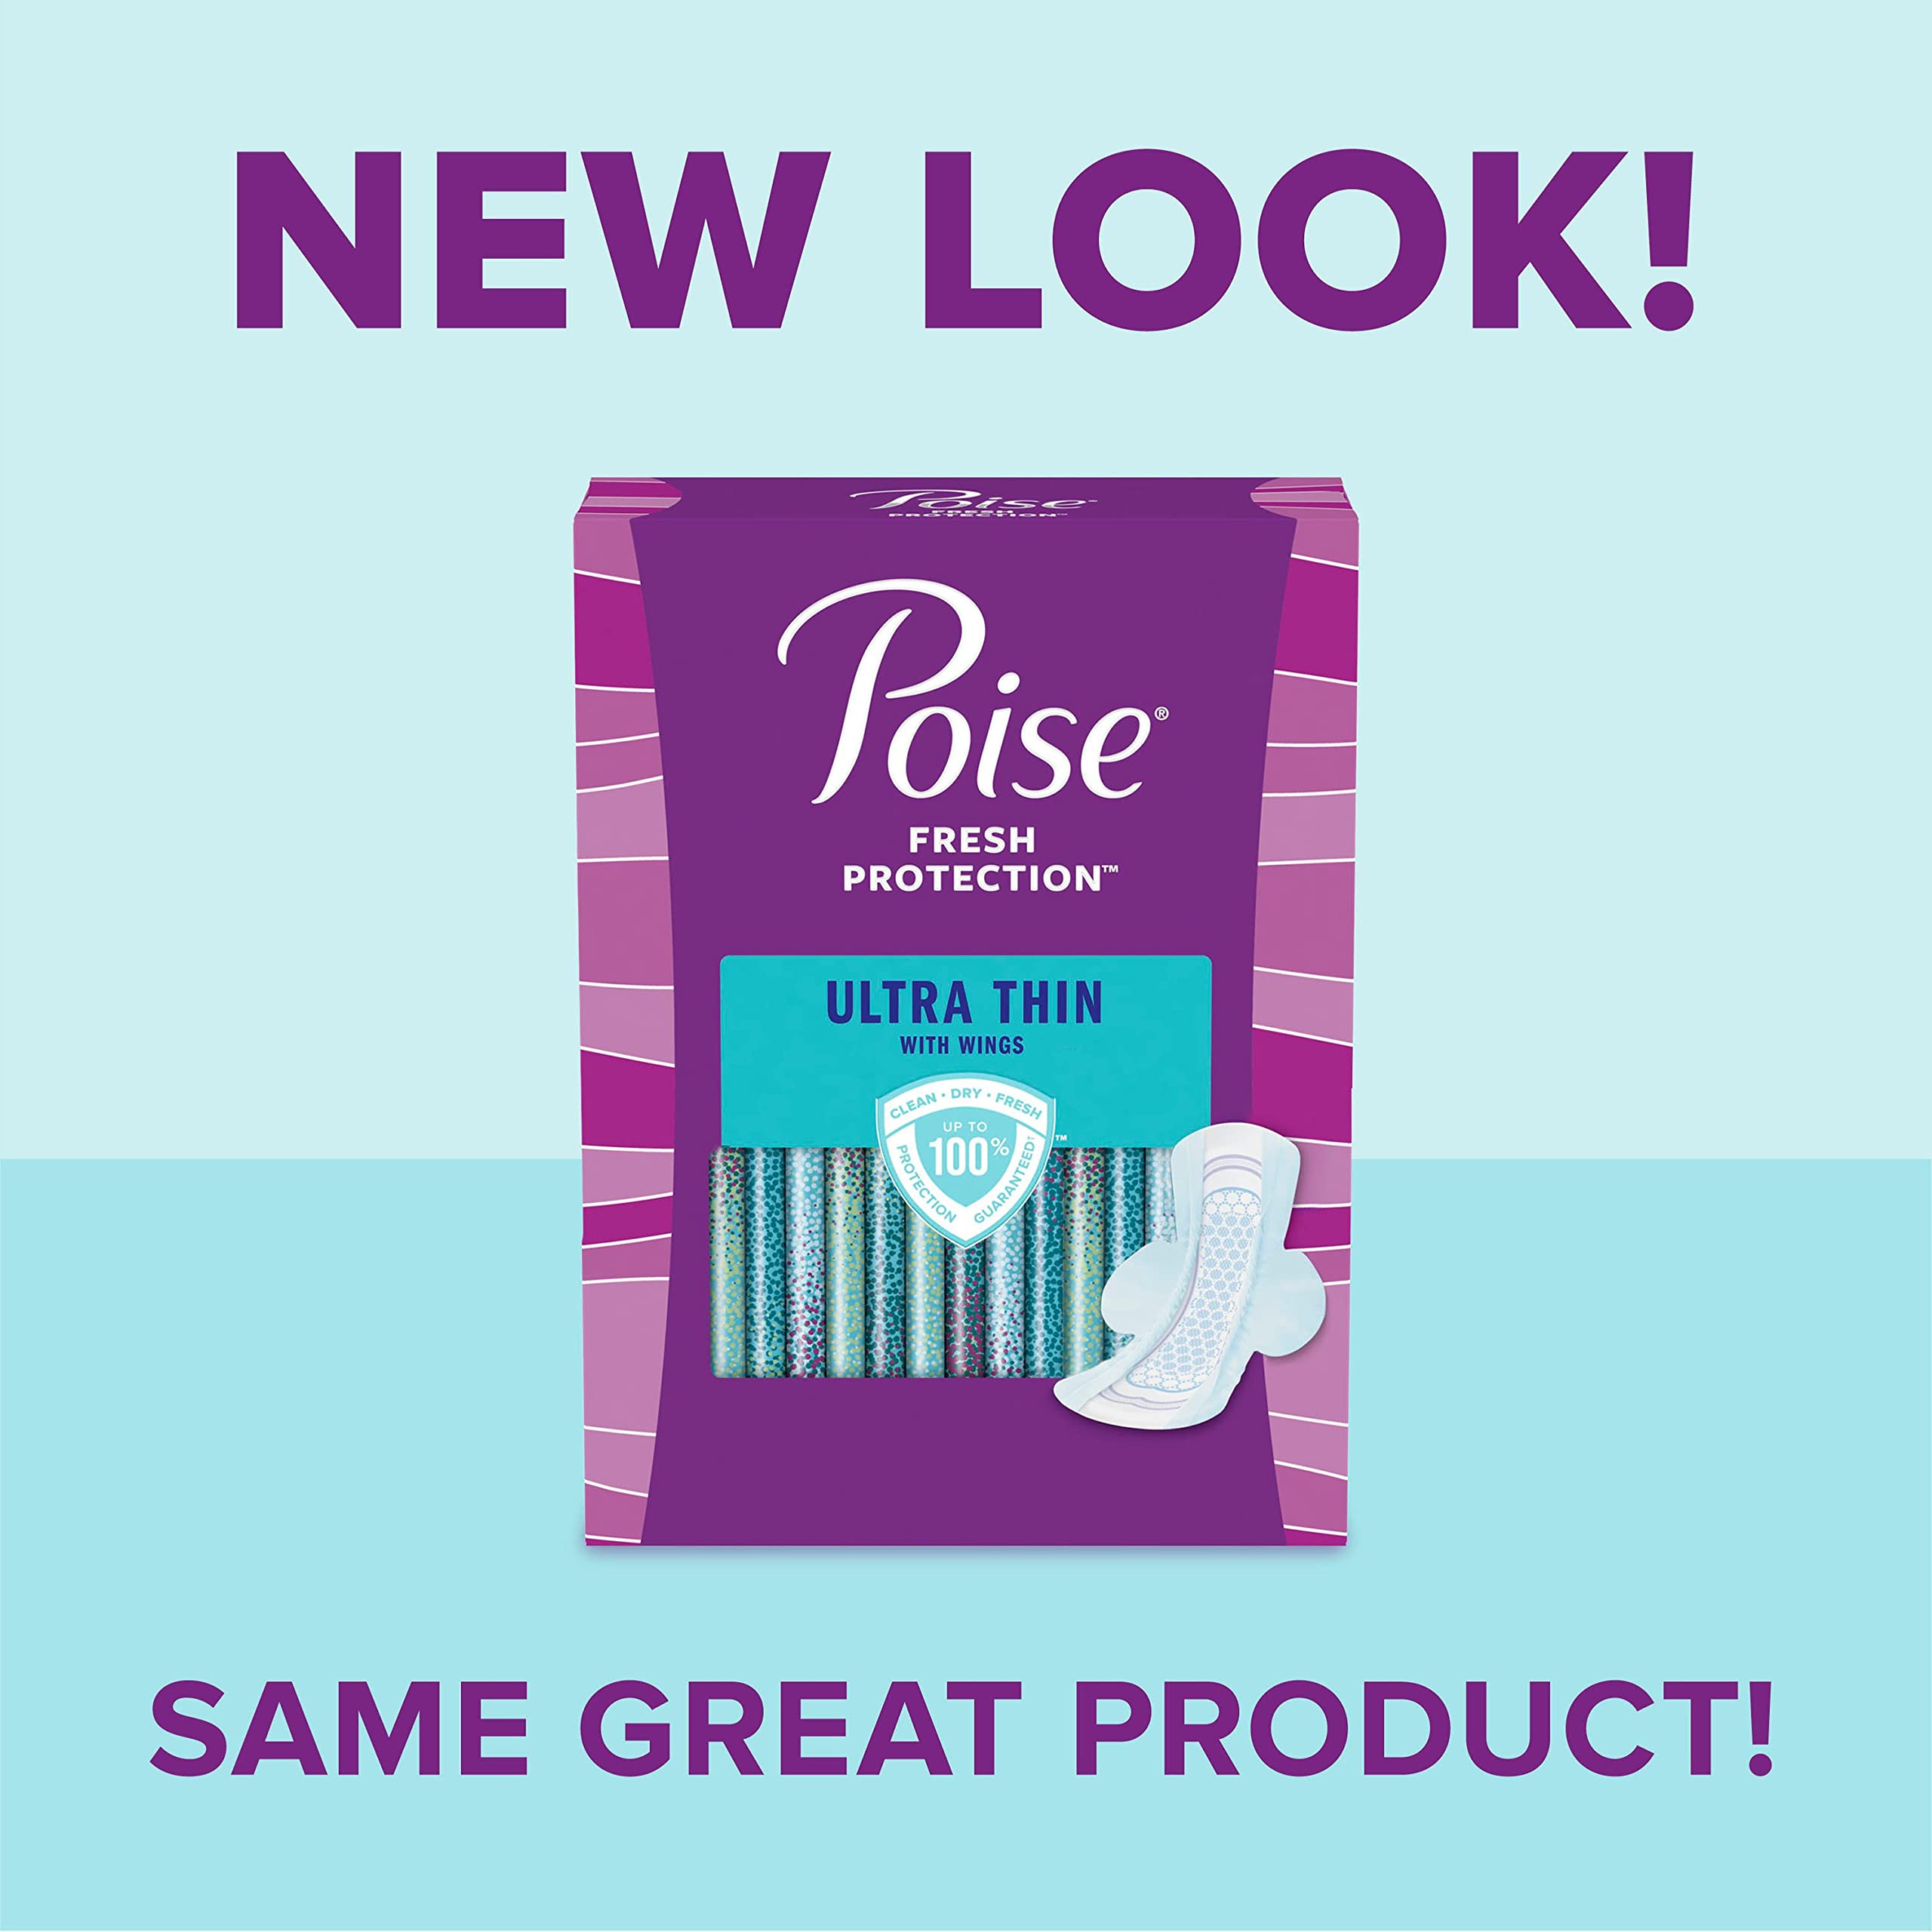 Poise Ultra Thin Incontinence Pads with Wings & Postpartum Incontinence Pads, 3 Drop Light Absorbency, Regular Length, 132 Count, Packaging May Vary